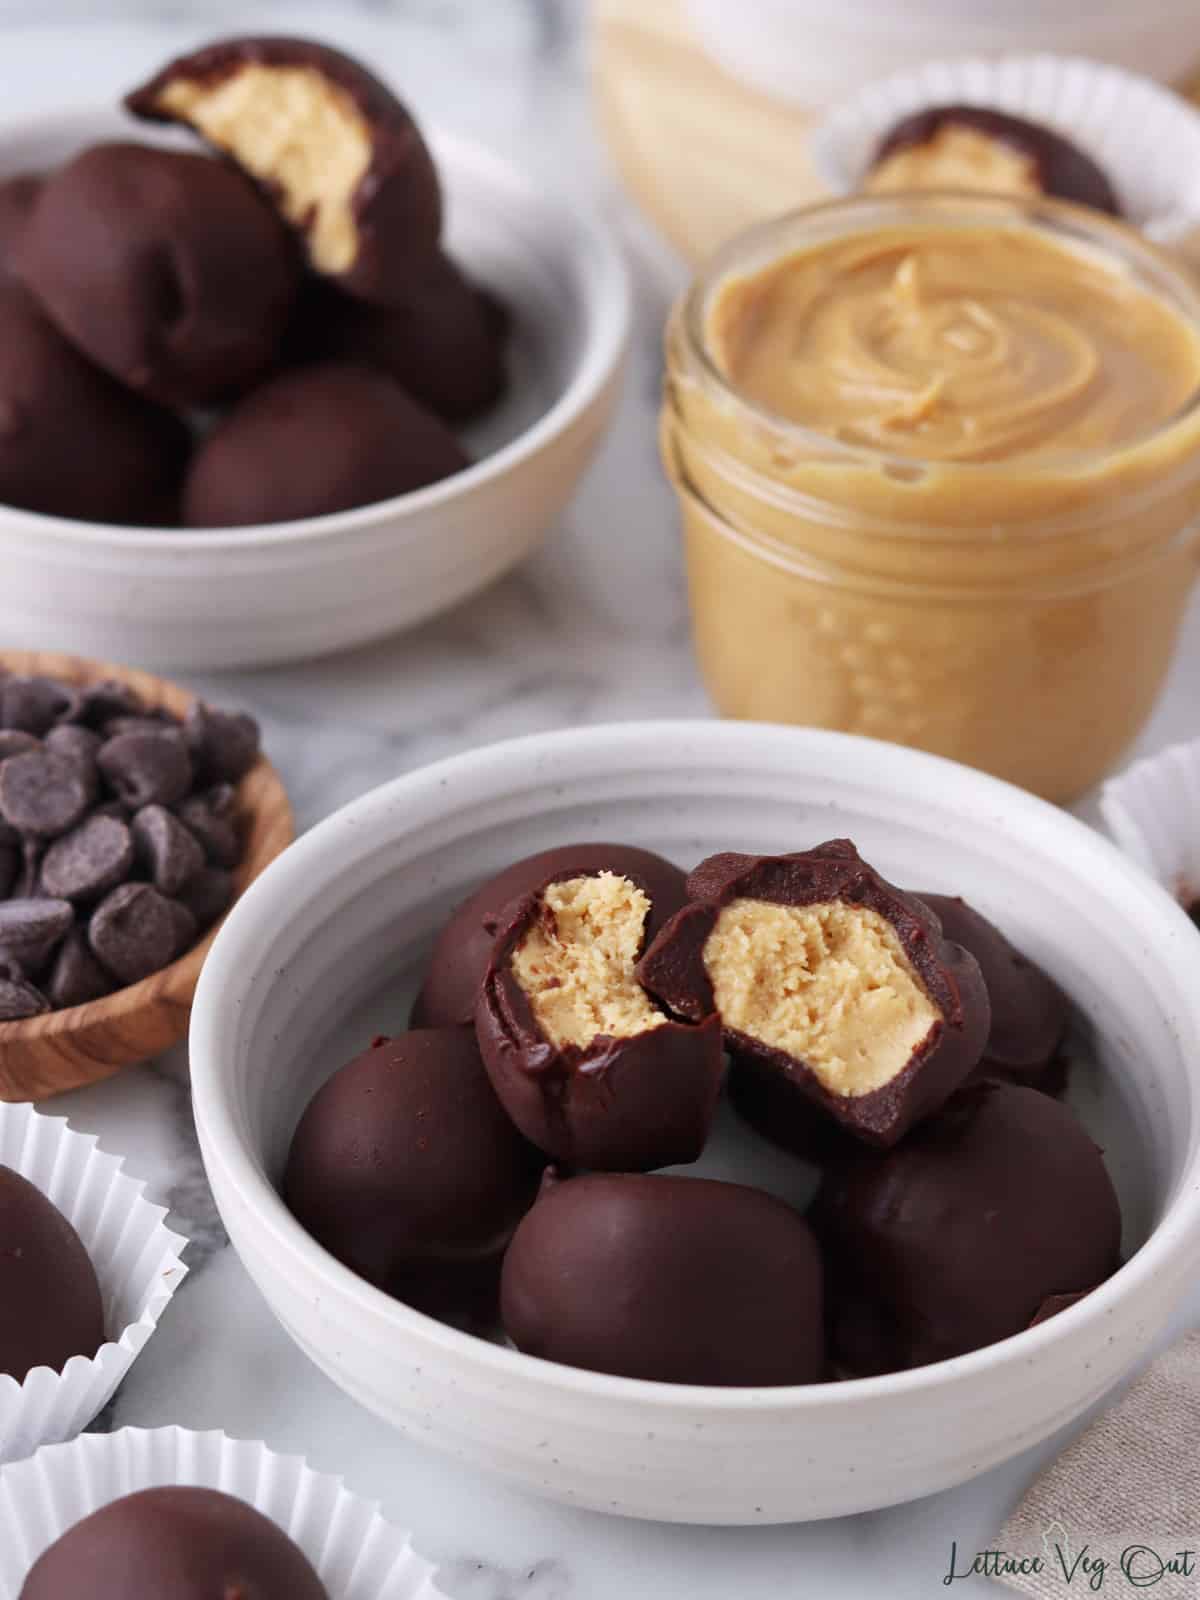 Two dishes of peanut butter balls with bites taken from some, along with a jar of peanut butter and small wood dish of chocolate chips.